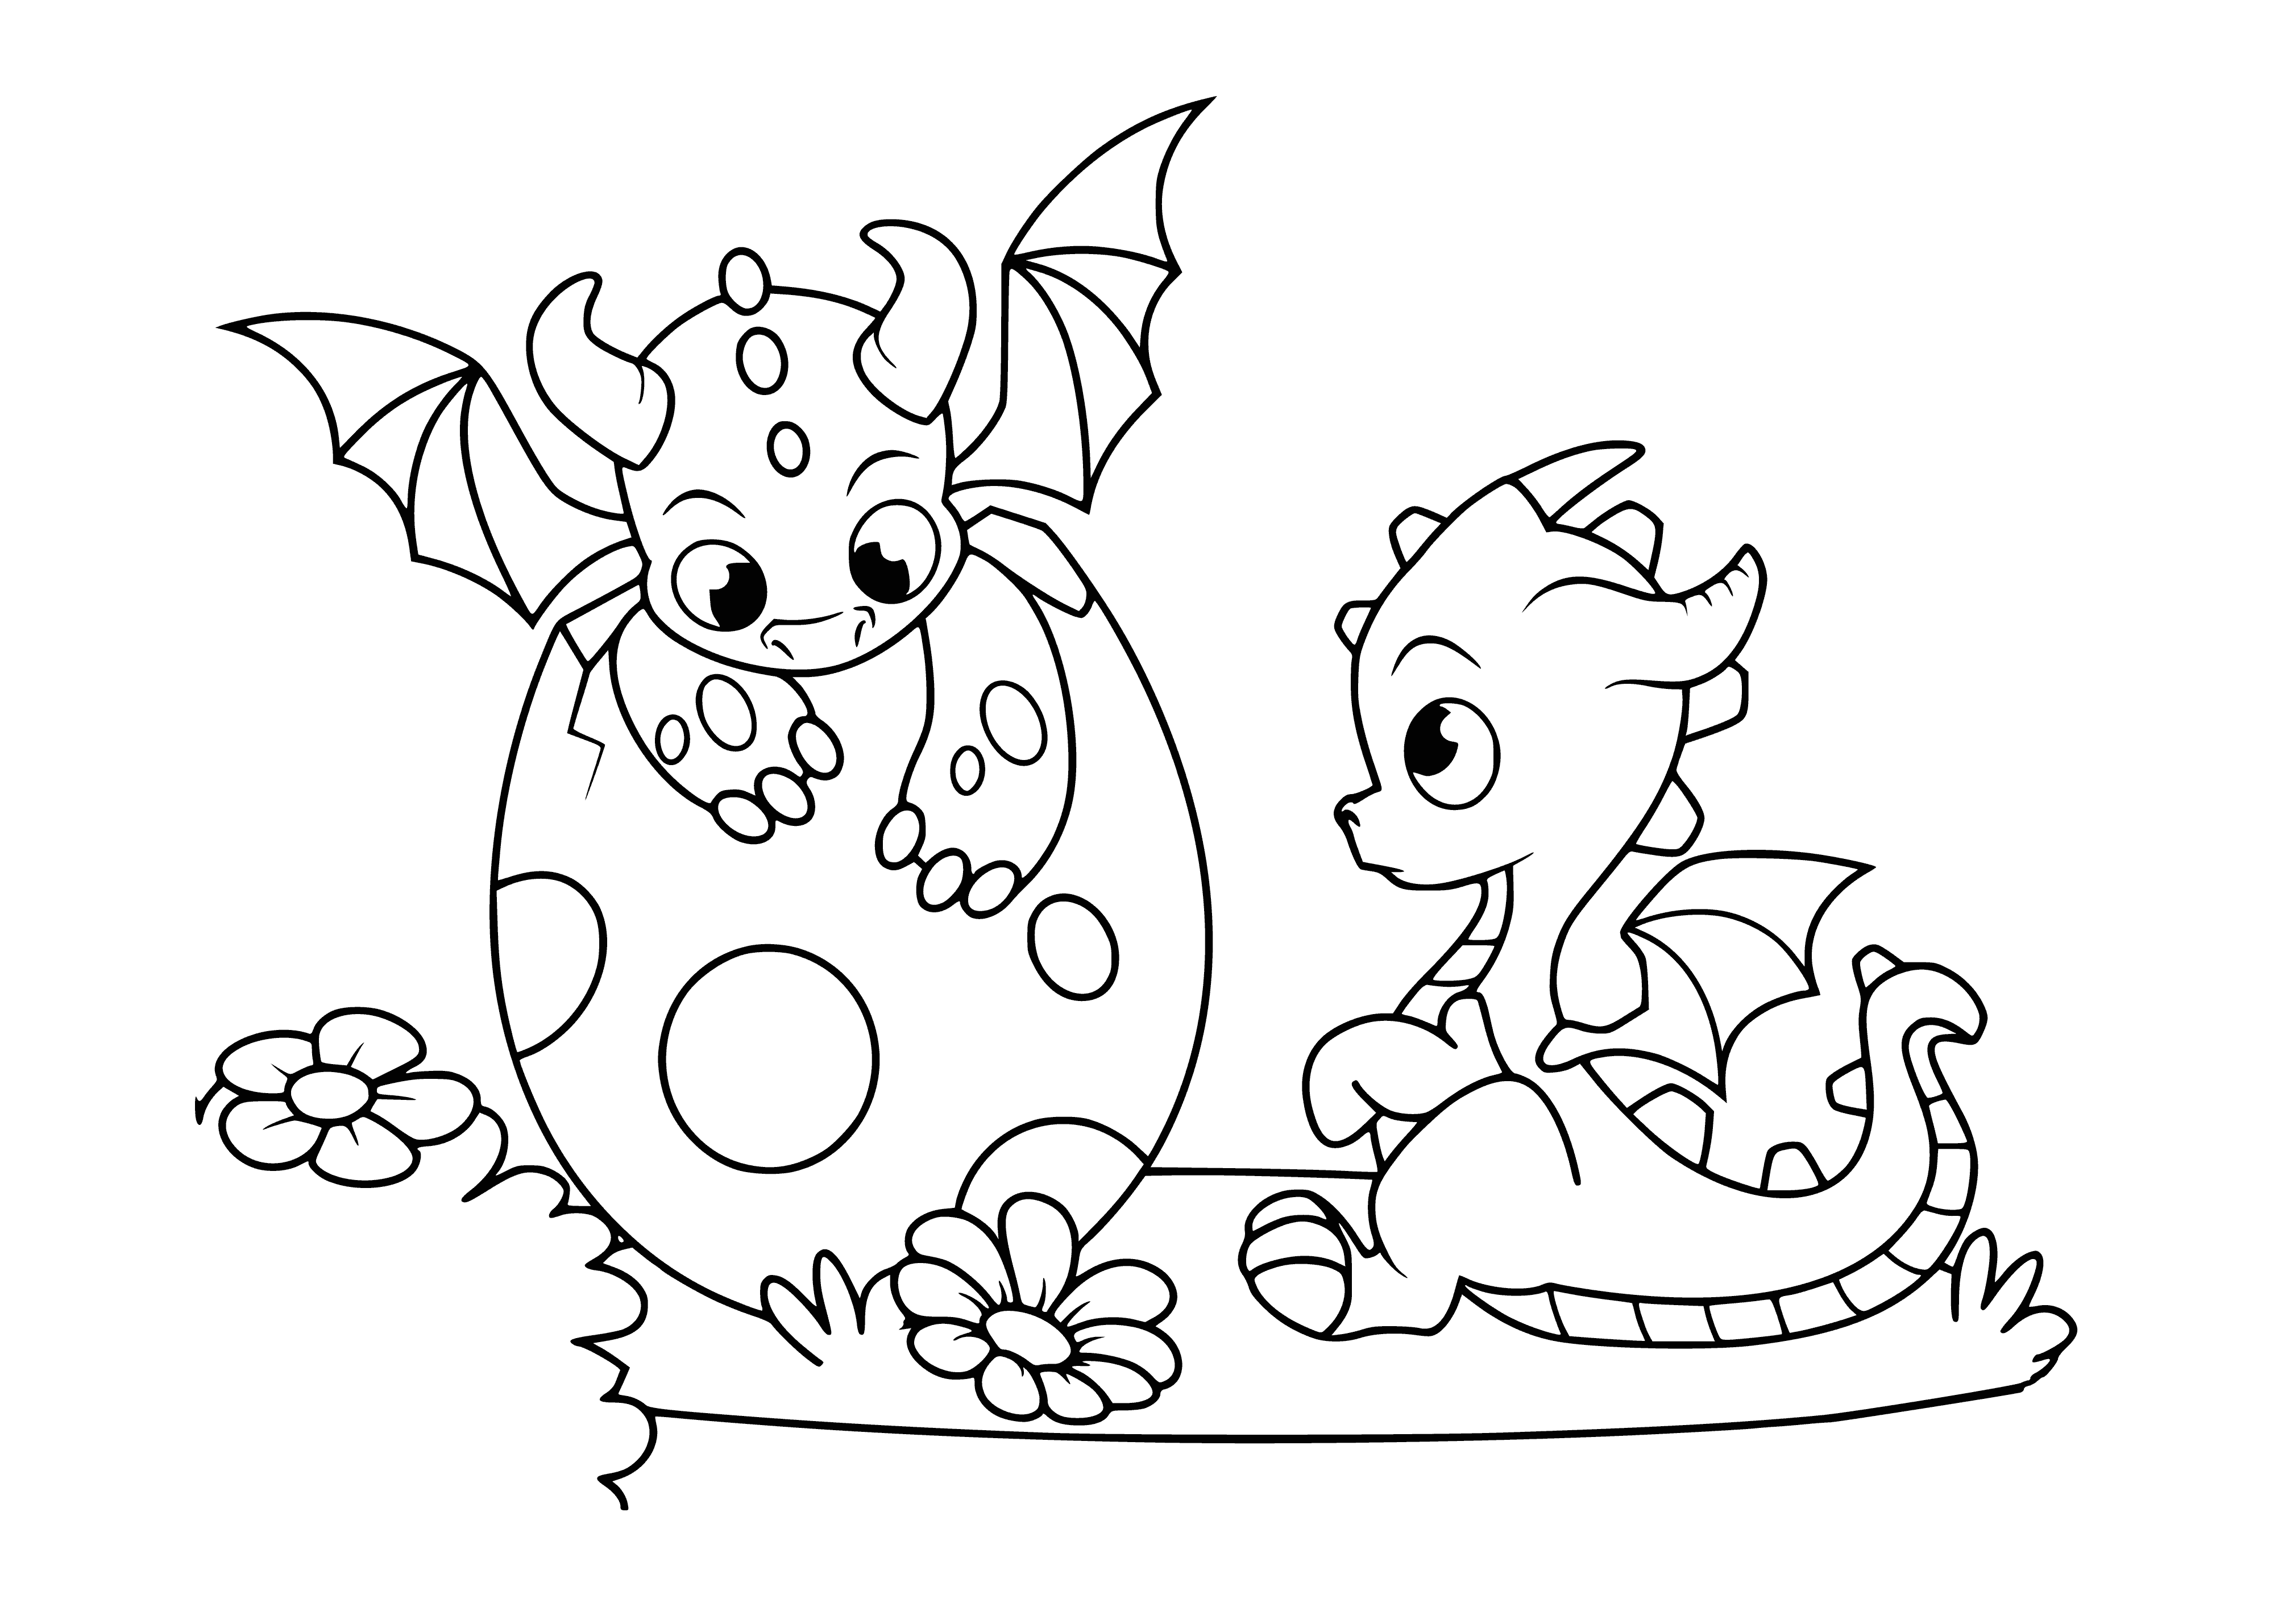 Little dragons coloring page